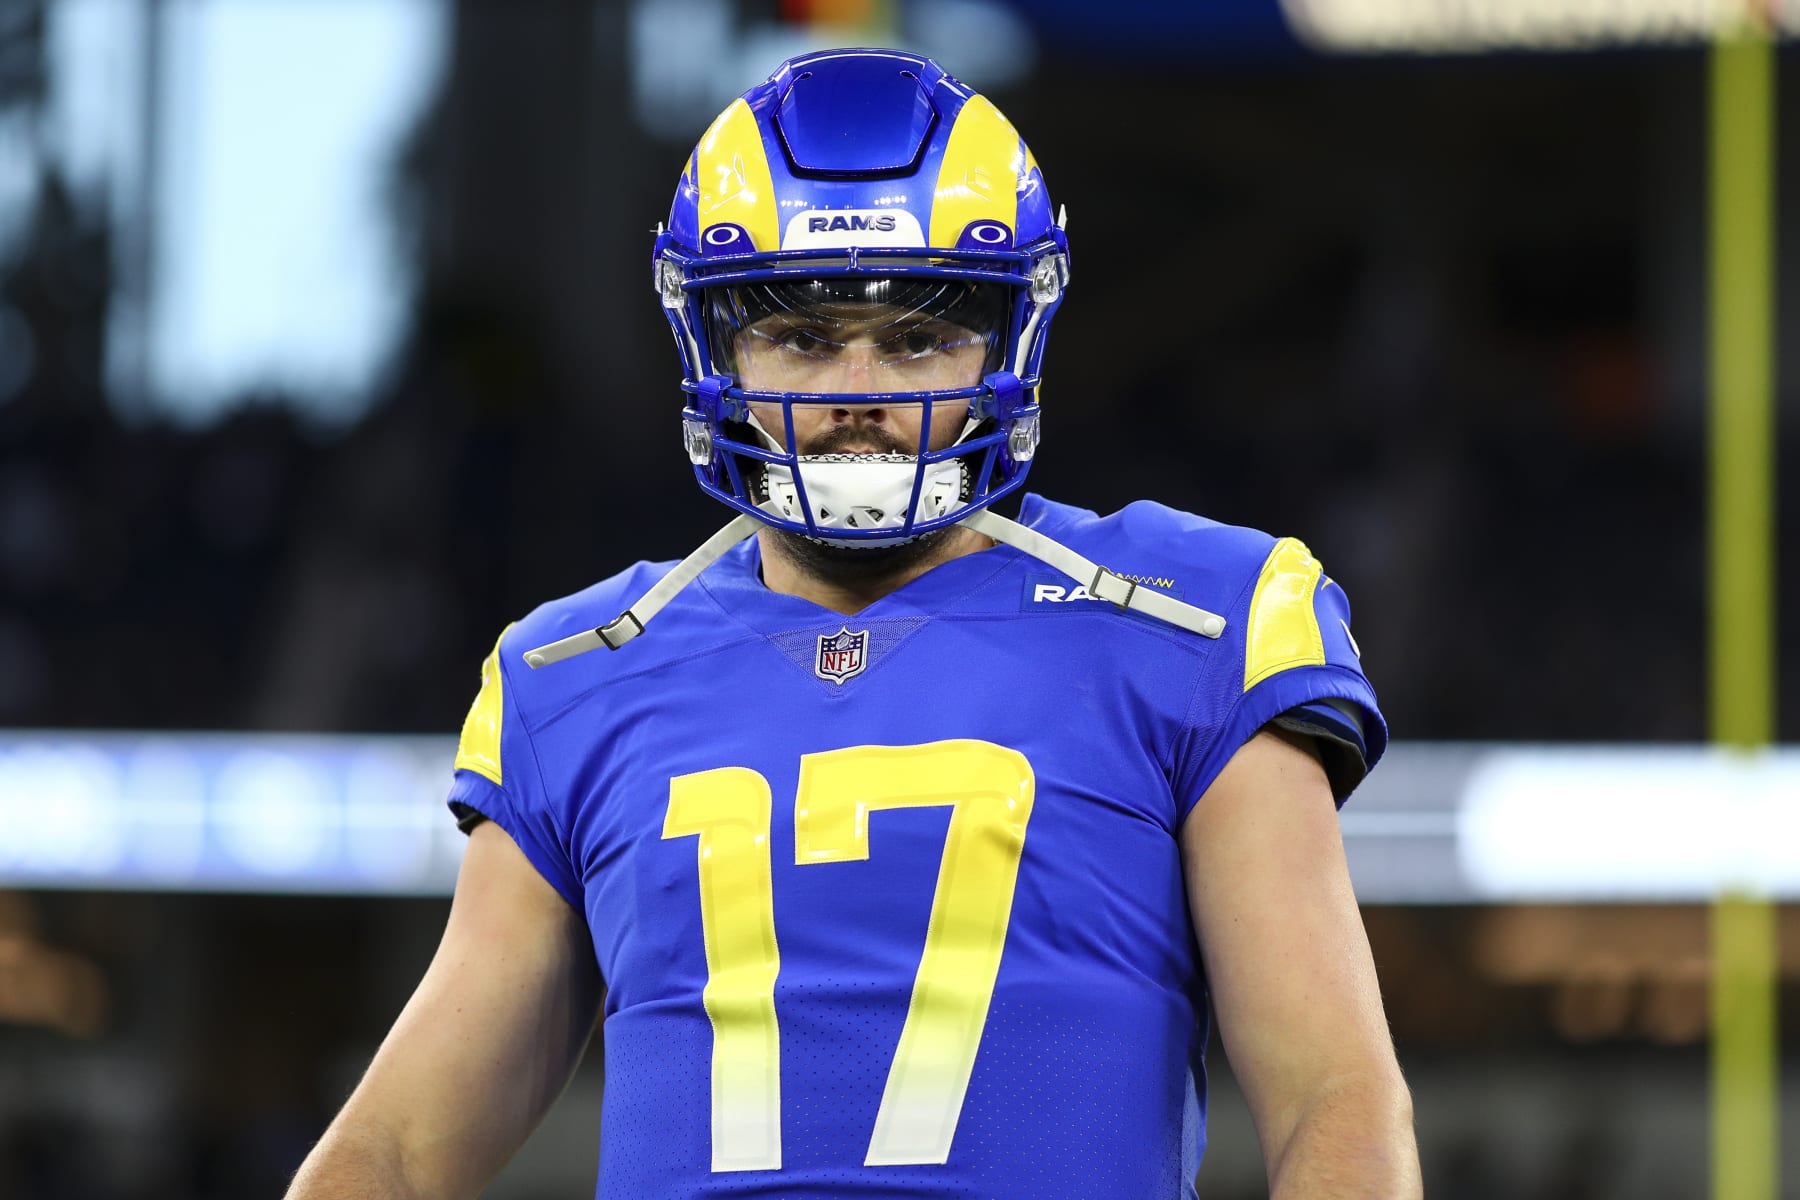 Rams star Cooper Kupp went from overlooked to Super Bowl centerpiece